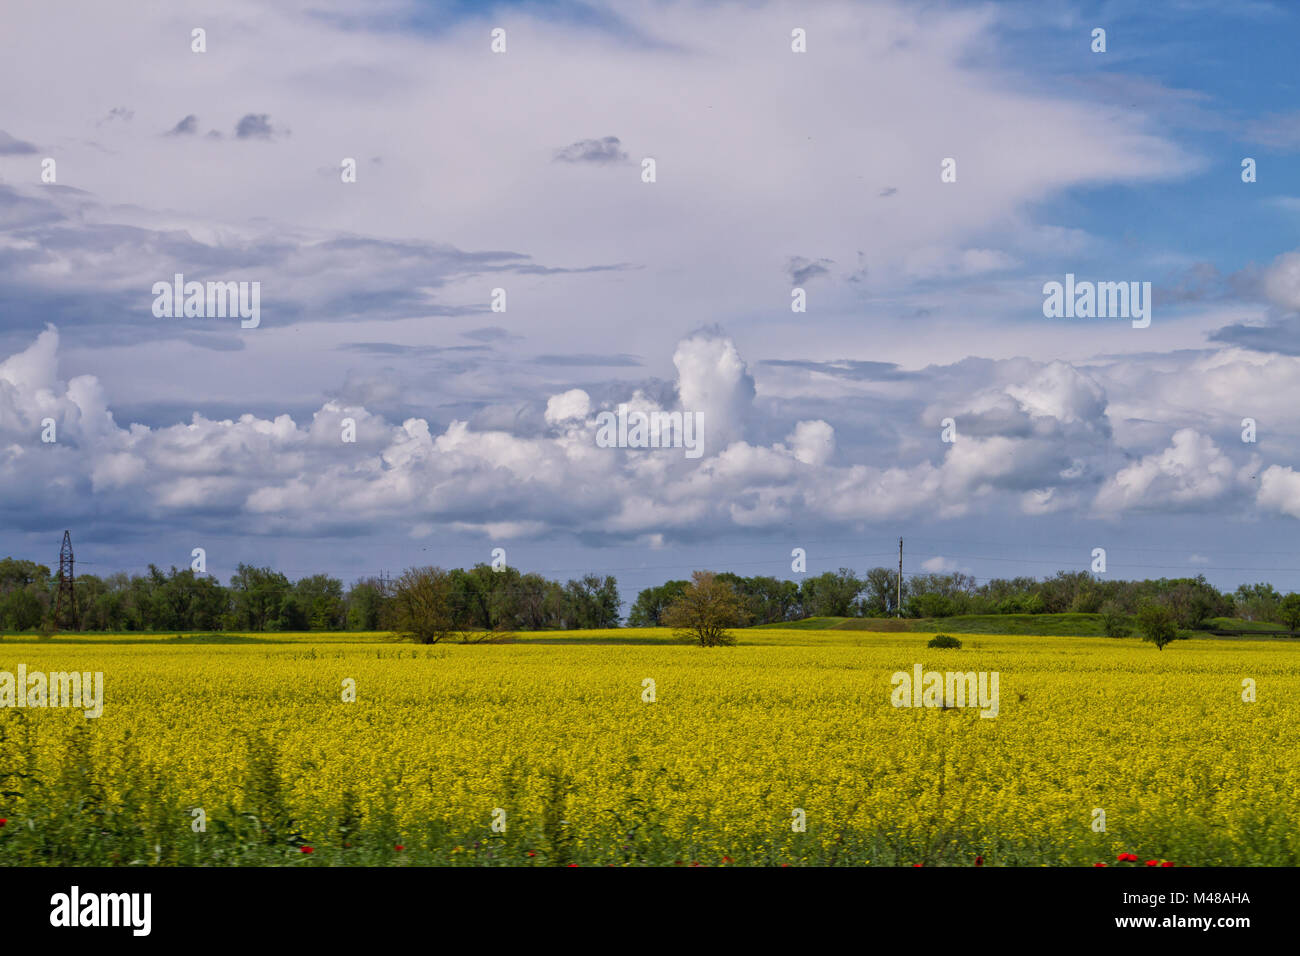 Landscape with flowering buckwheat field and fluffy clouds Stock Photo